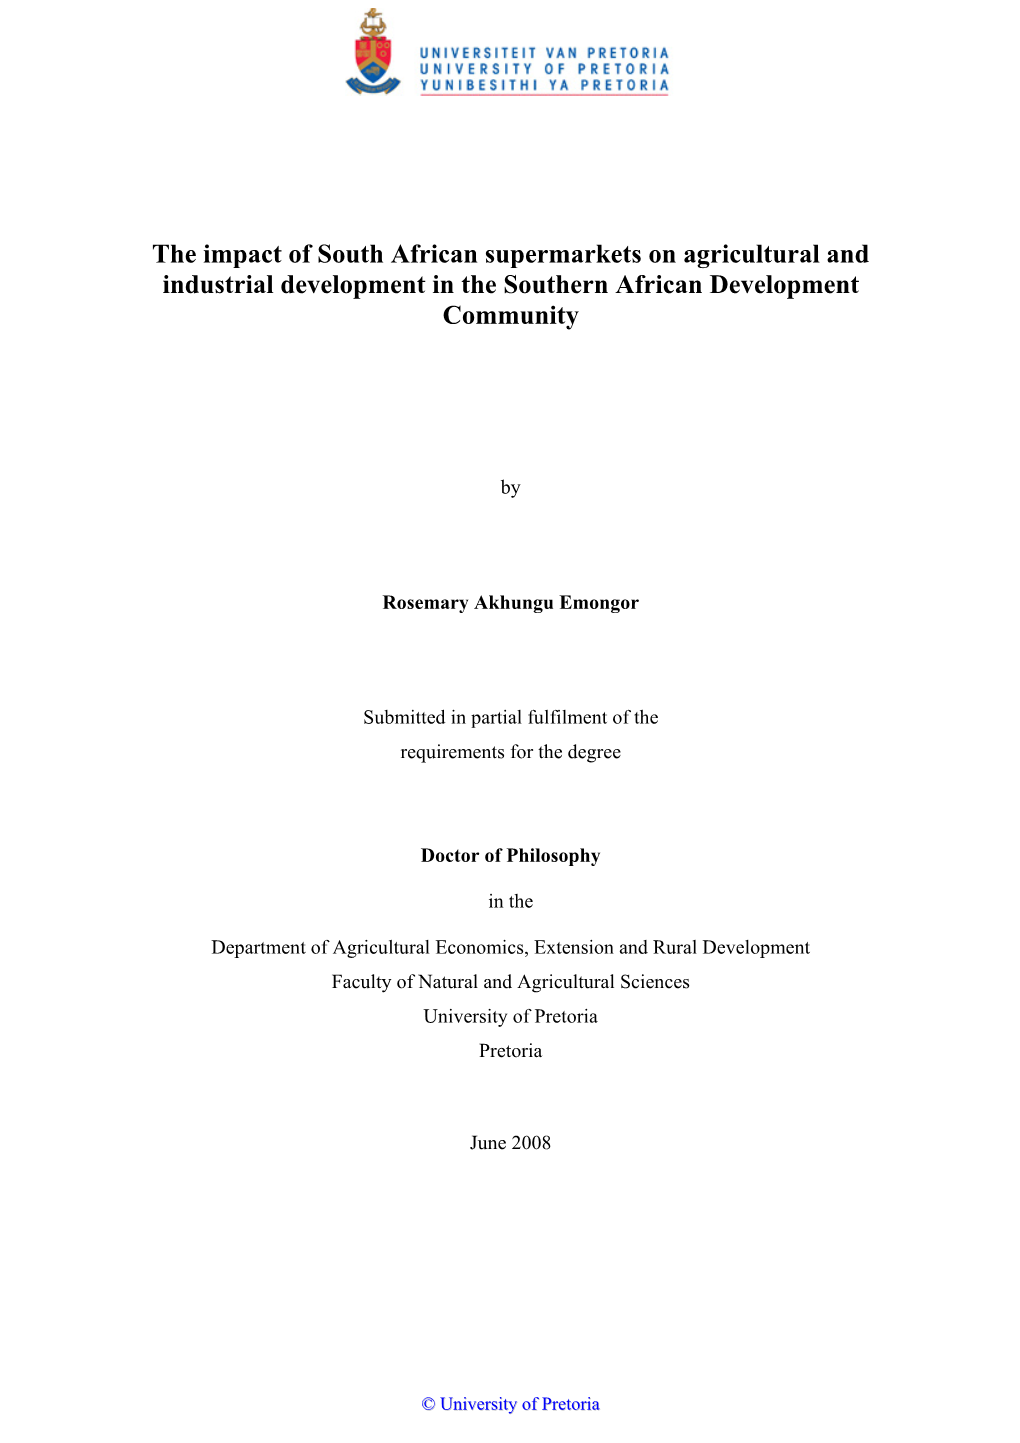 The Impact of South African Supermarkets on Agricultural and Industrial Development in the Southern African Development Community